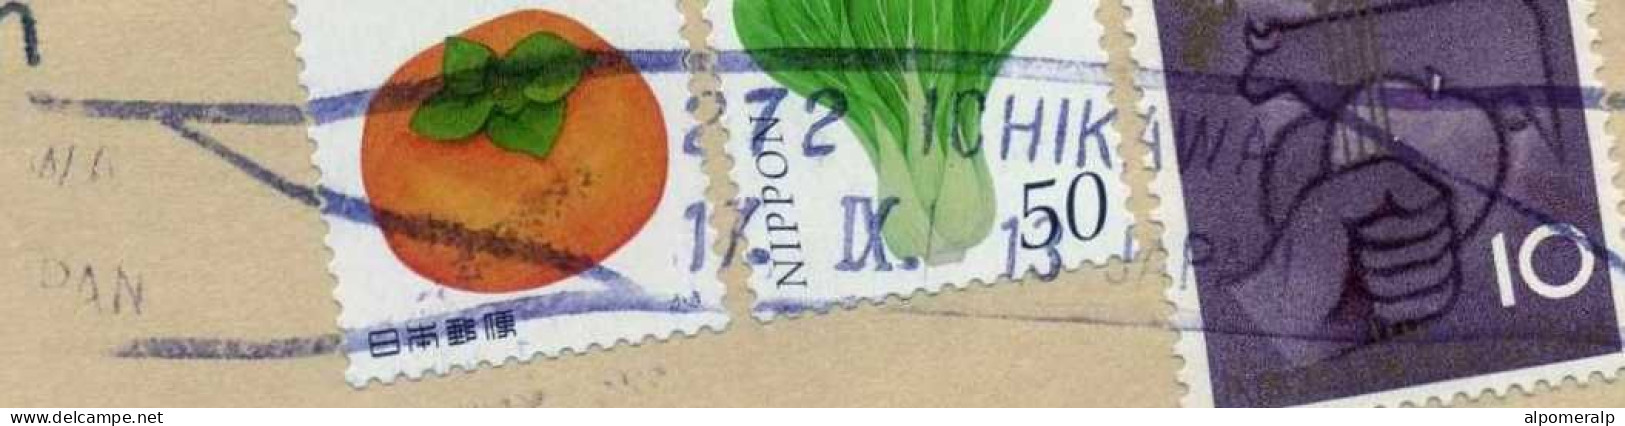 Japan 2013 Vegetable & Fruit | Air Mail Cover Used To İzmir From Ichikawa | Agriculture, Vegetables Fruits, Cattle, Hand - Légumes